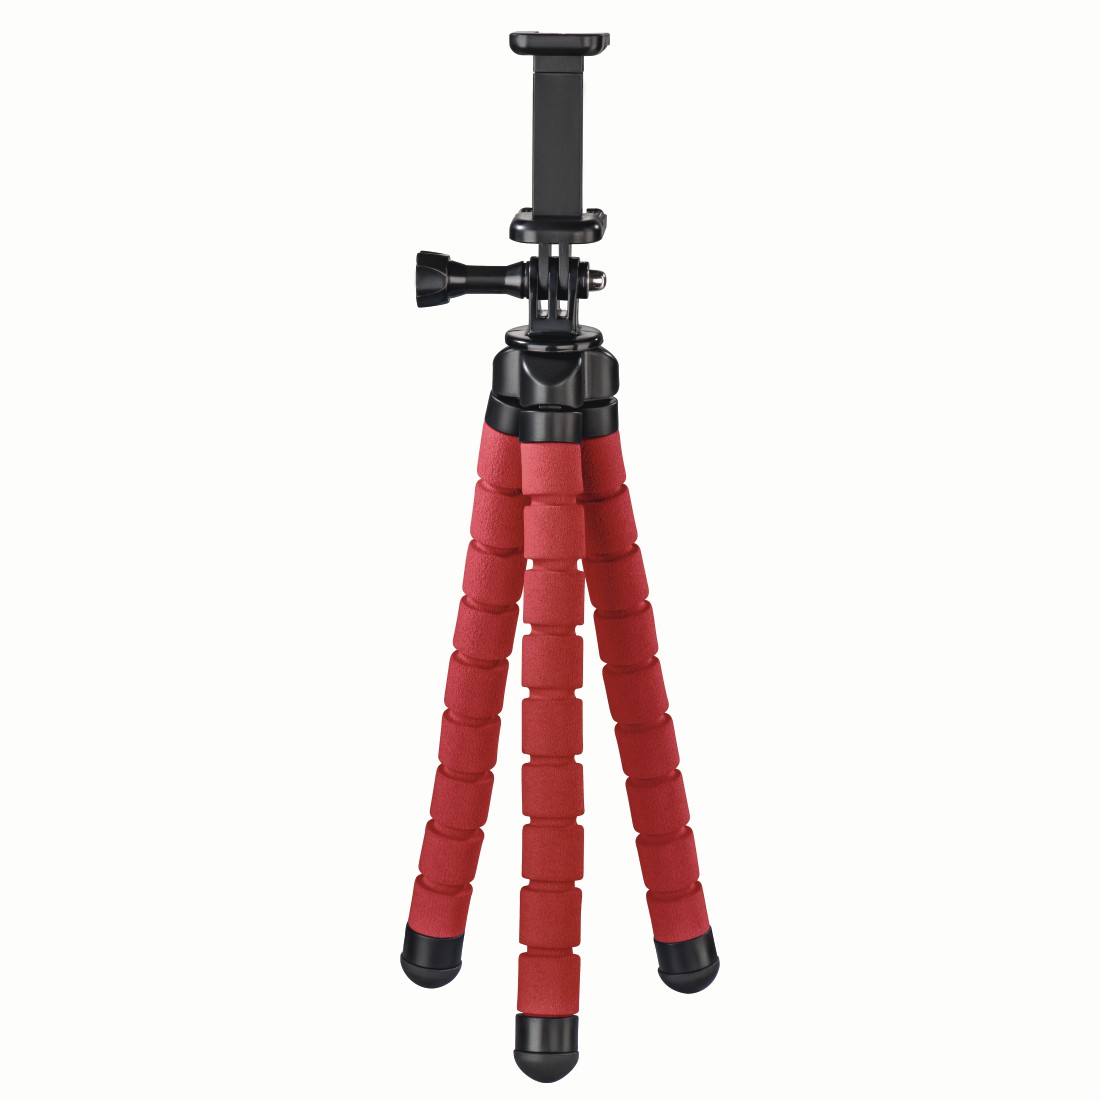 00004617 Hama "Flex" Tripod for Smartphone and GoPro, 26 cm, red | hama.at